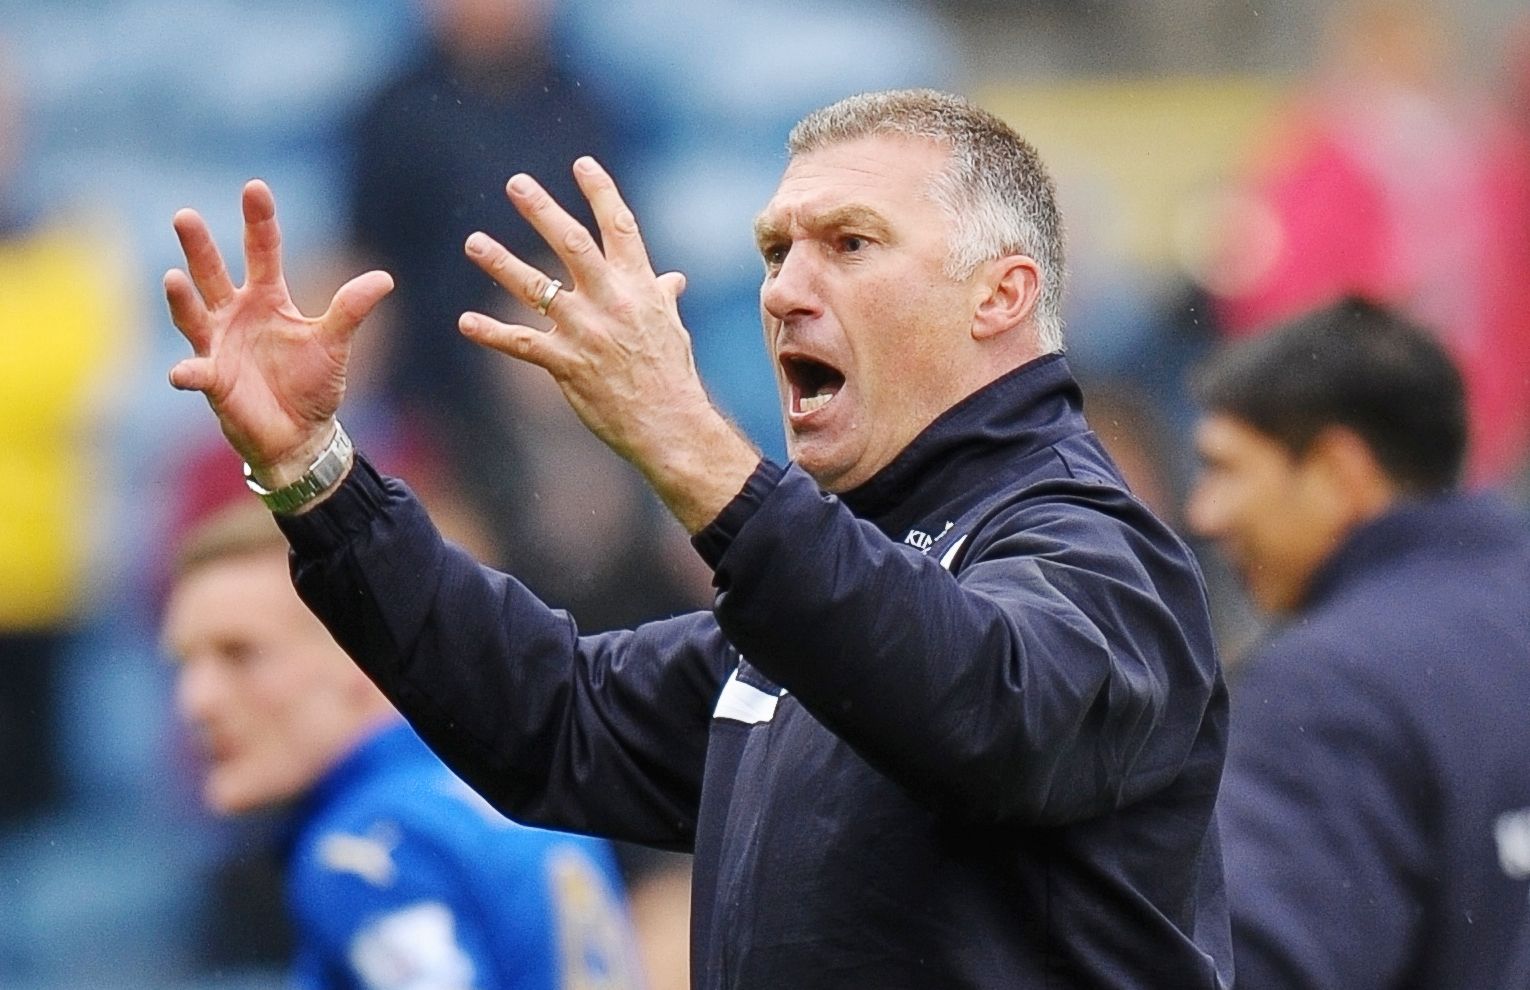 Football - Burnley v Leicester City - Barclays Premier League - Turf Moor - 25/4/15 
Leicester City manager Nigel Pearson celebrates at full time 
Action Images via Reuters / Paul Burrows 
Livepic 
EDITORIAL USE ONLY. No use with unauthorized audio, video, data, fixture lists, club/league logos or 